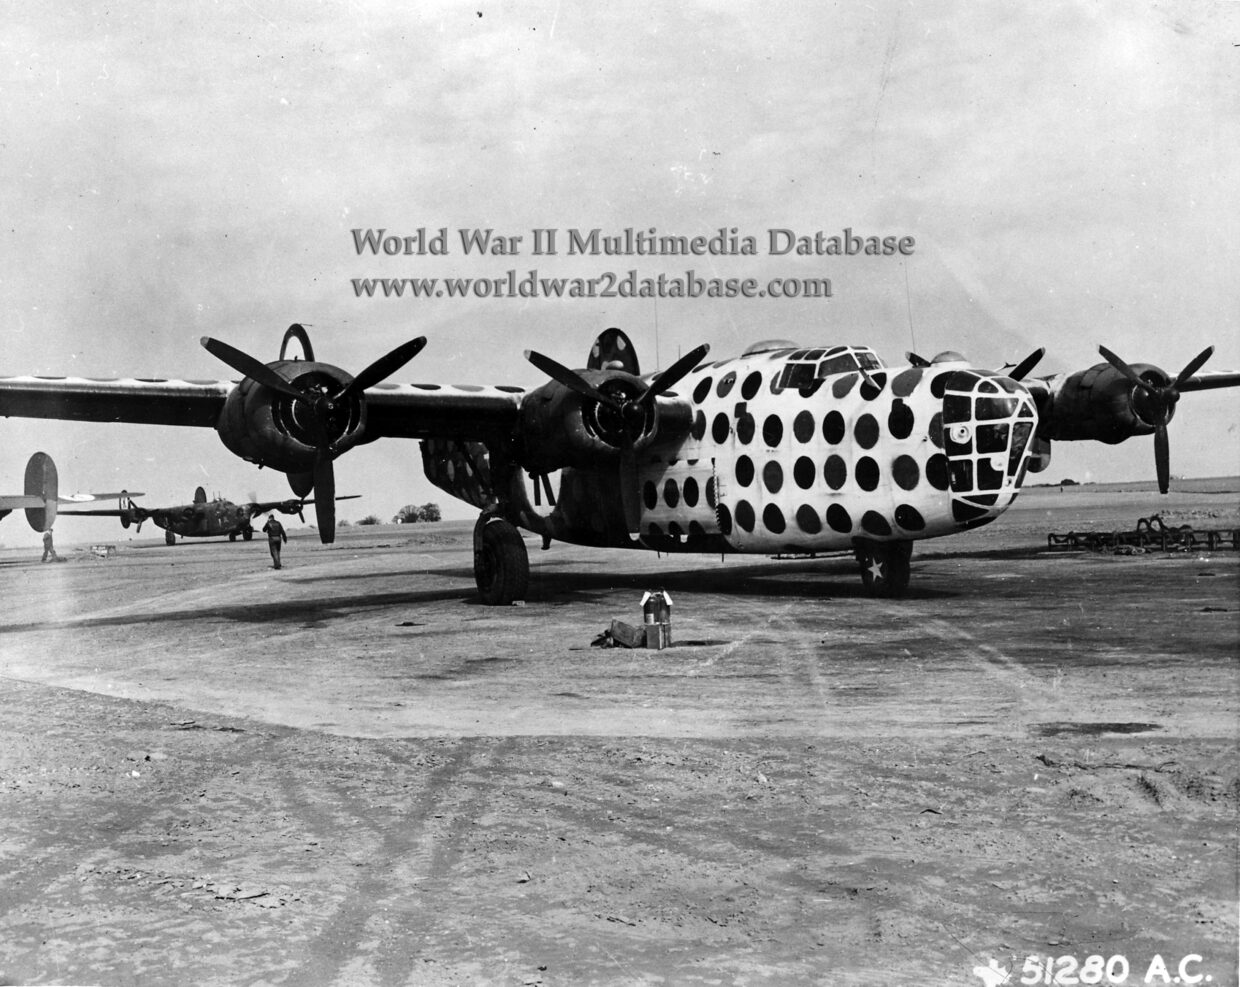 Consolidated B-24D Liberator “First Sergeant“ of 458th Bomb Group